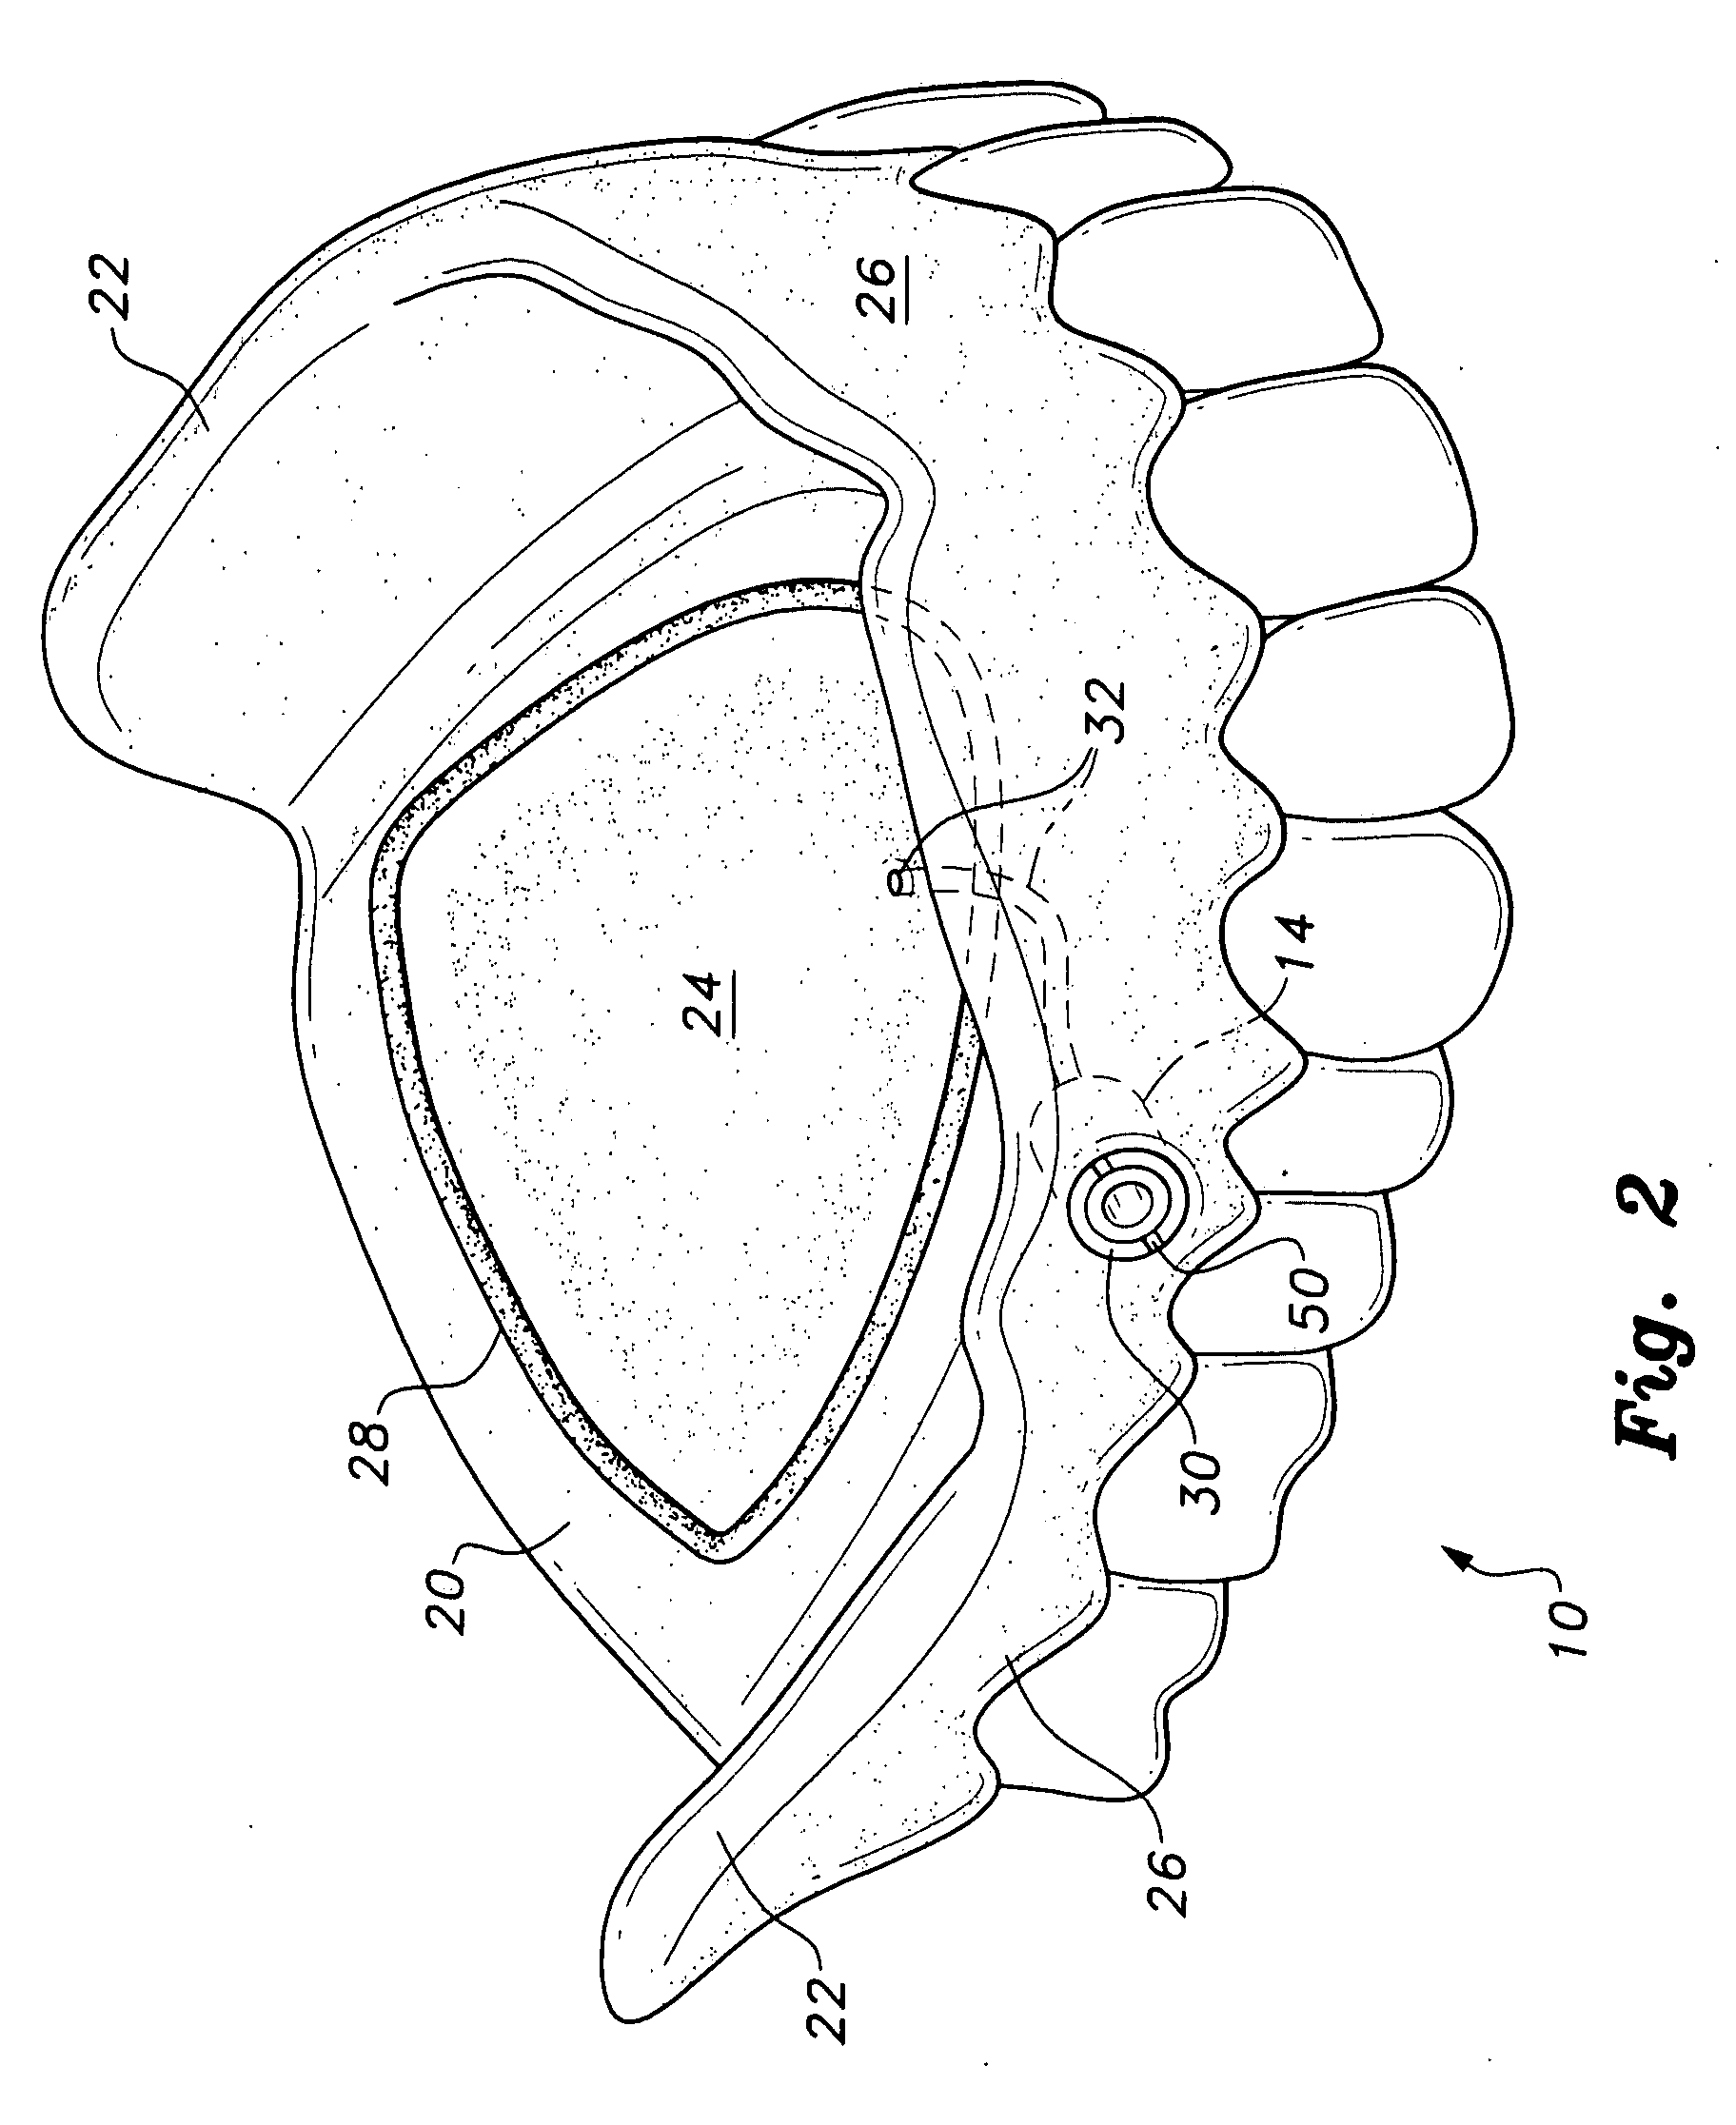 Denture with suction attachment